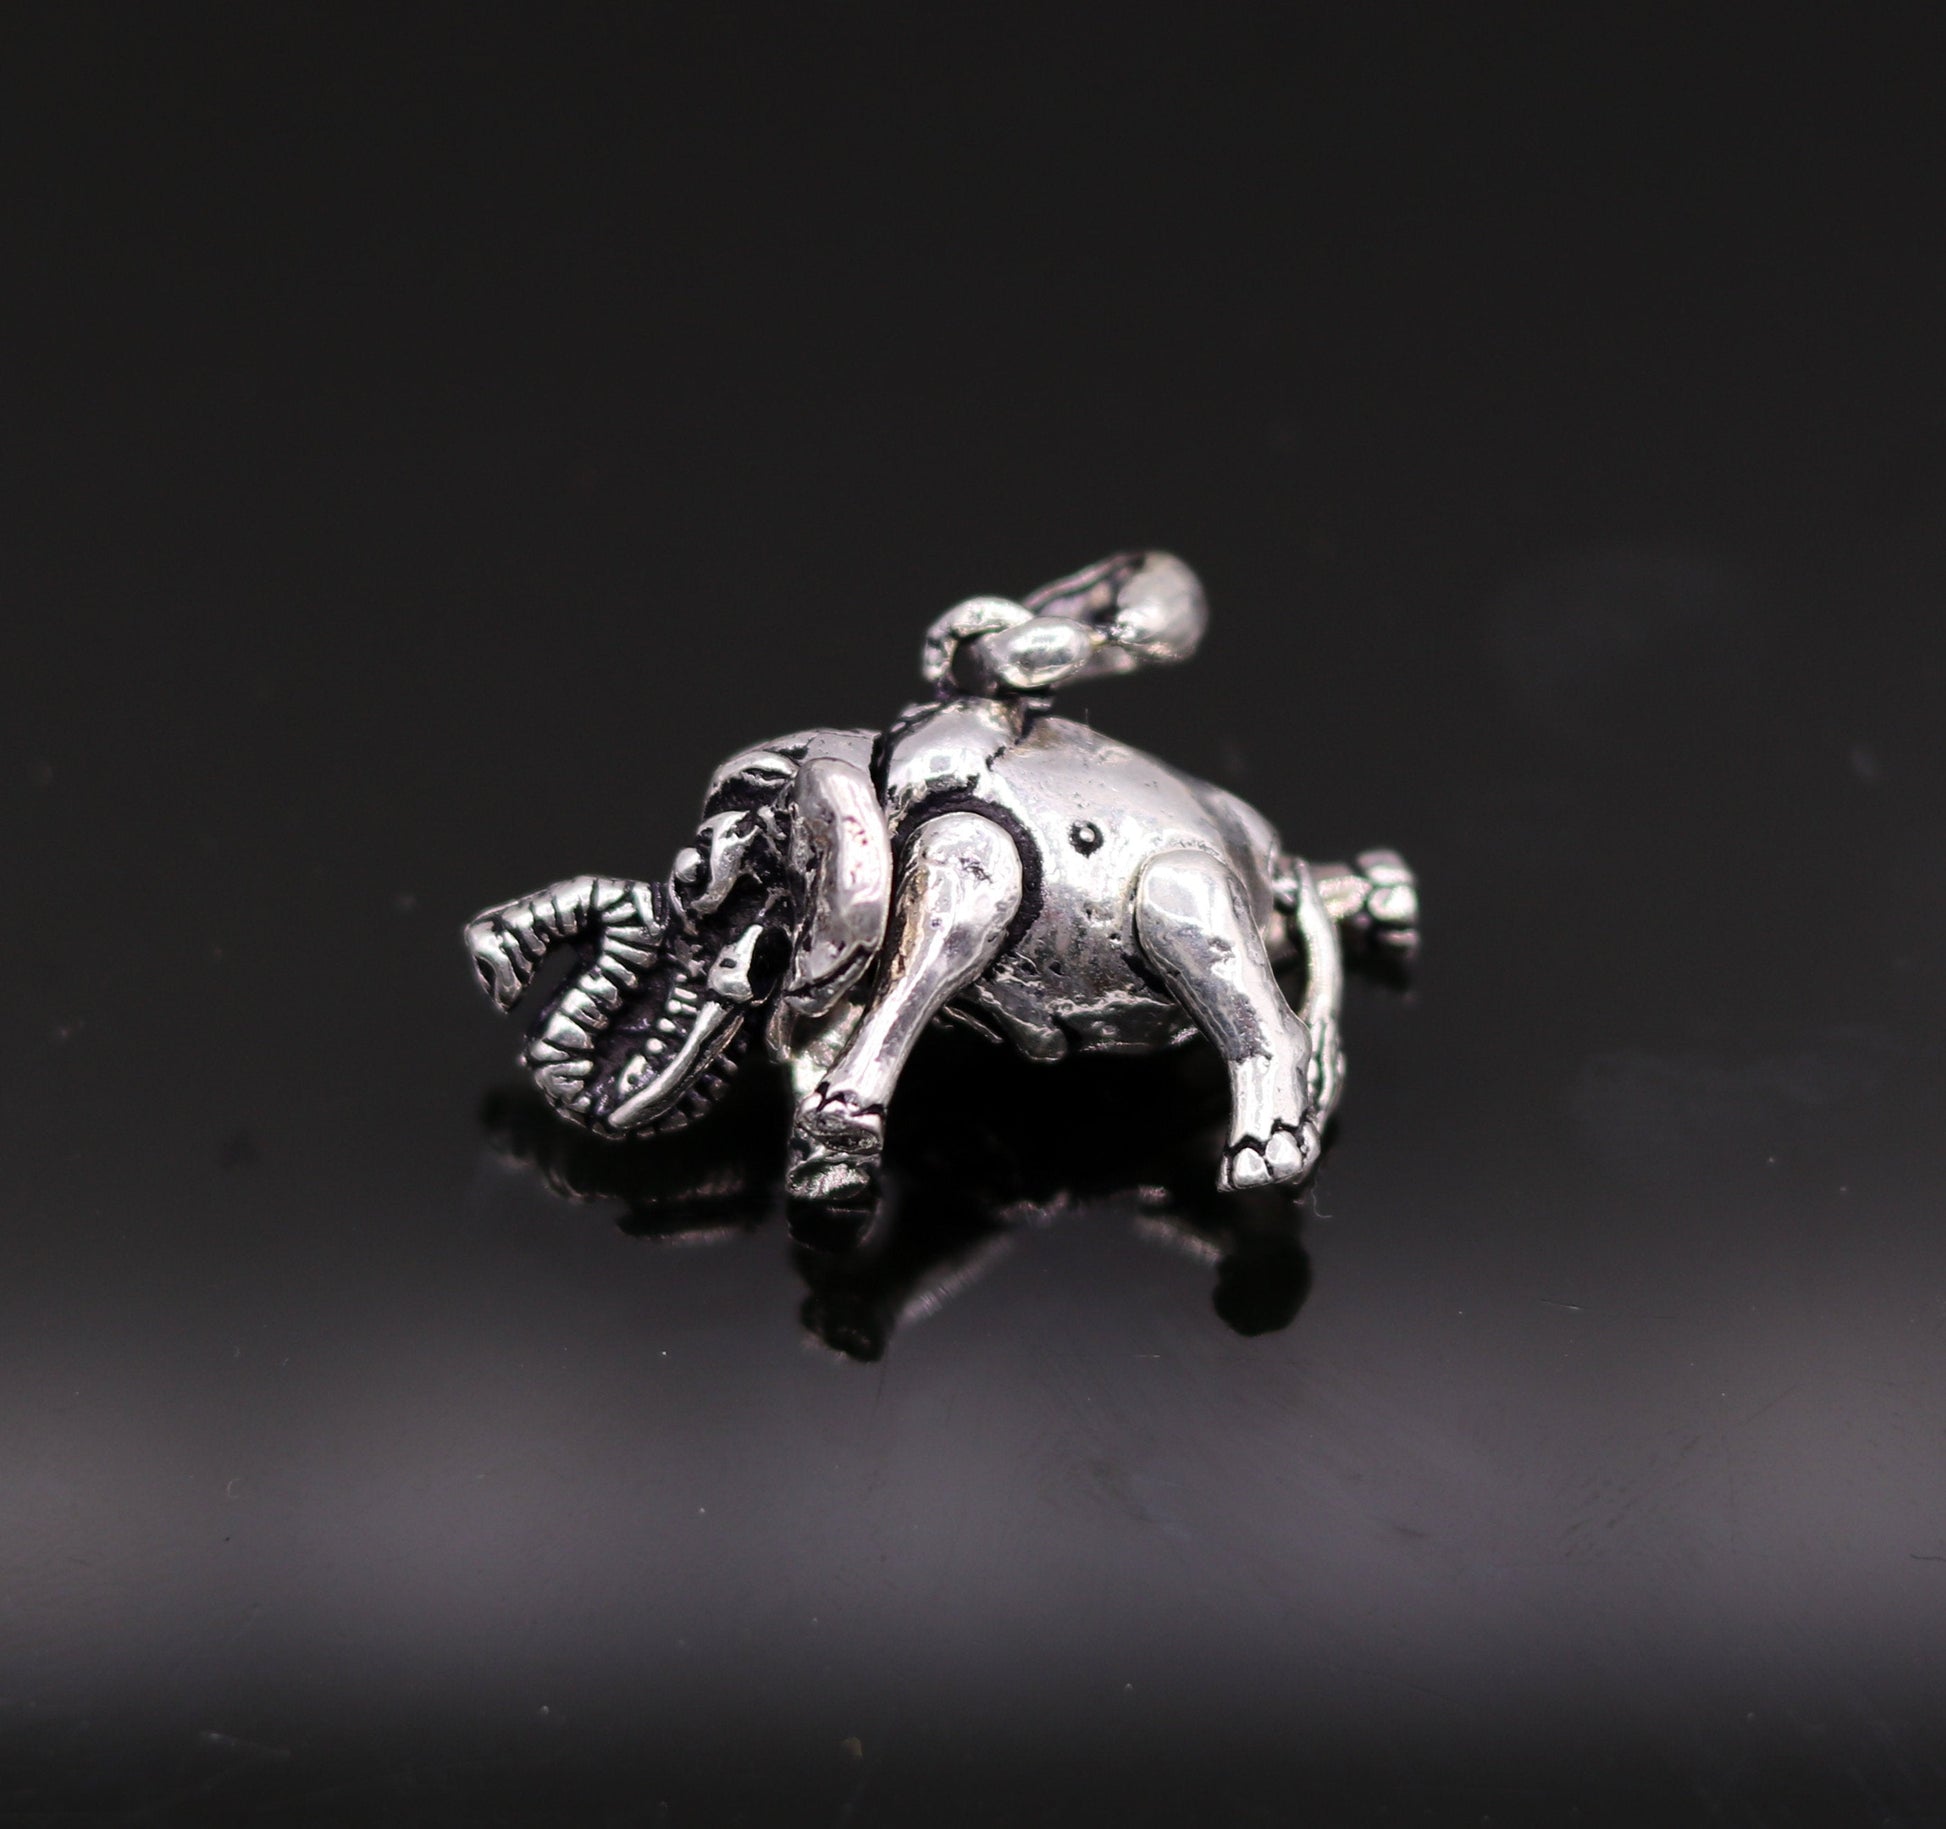 925 sterling silver amazing design little elephant pendant with movable legs flexible pendant necklace gifting jewelry india nsp207 - TRIBAL ORNAMENTS